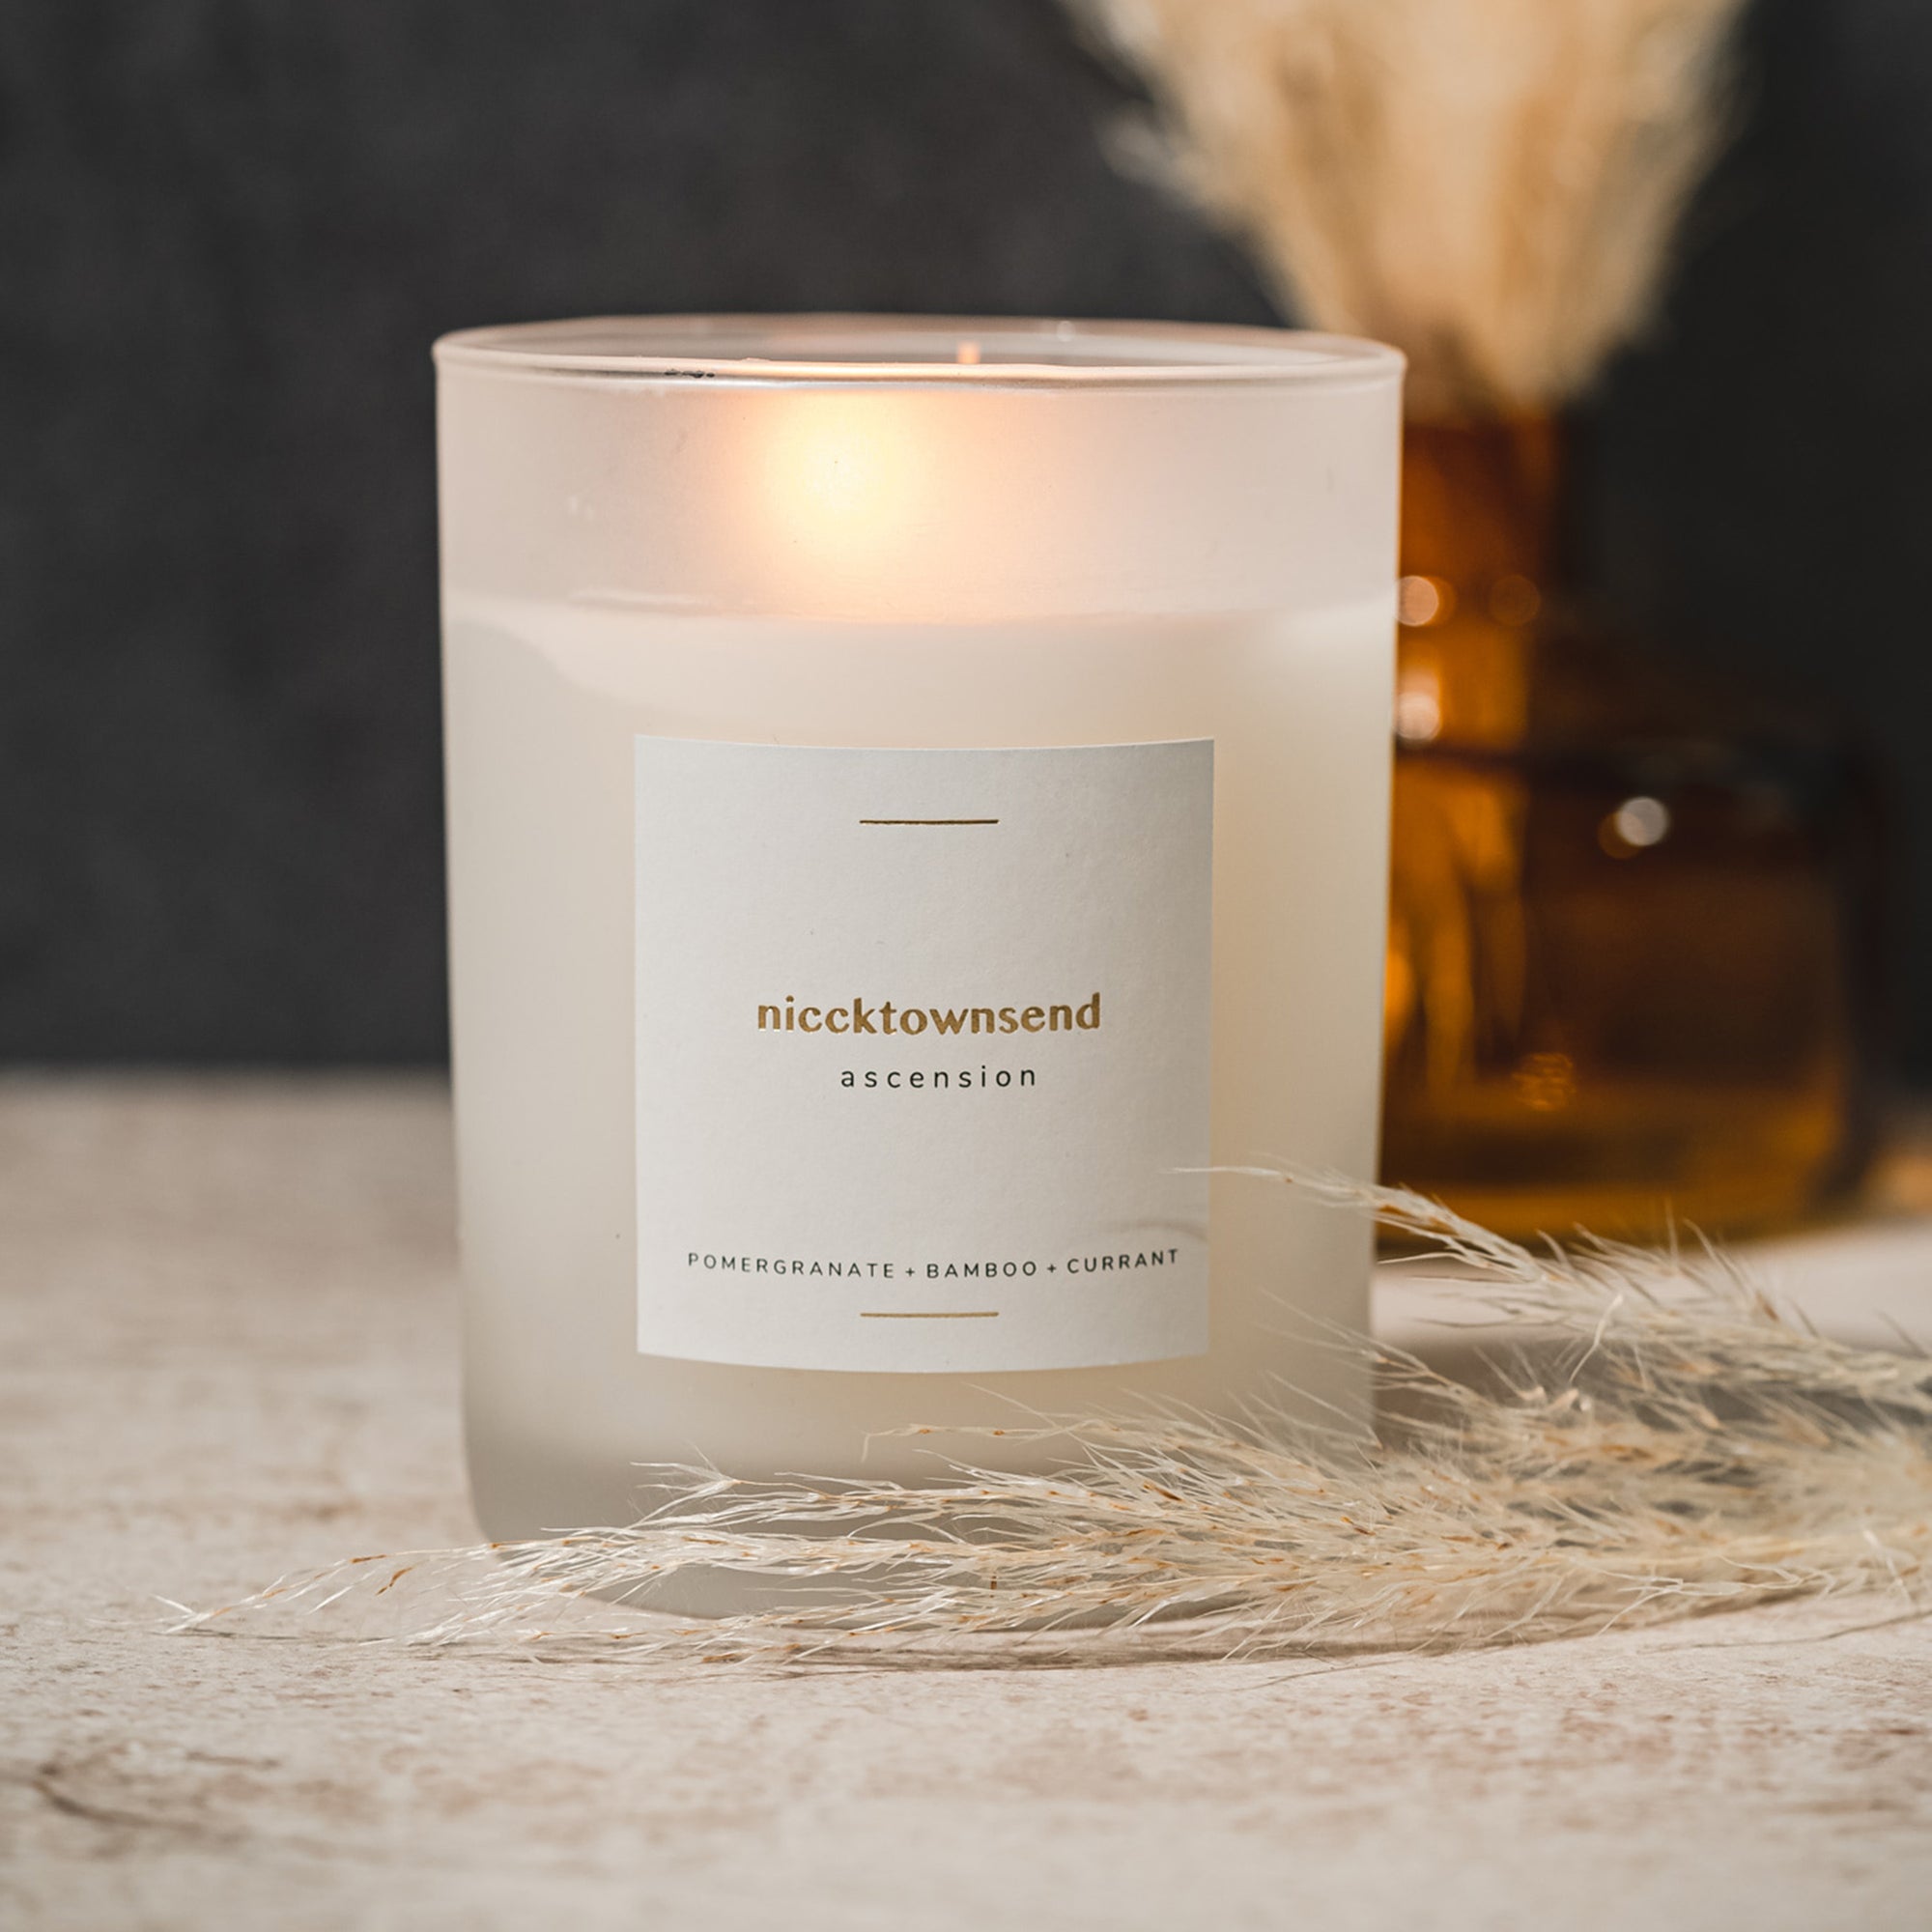 Nicck Townsend - Signature Candle in Ascension Scent